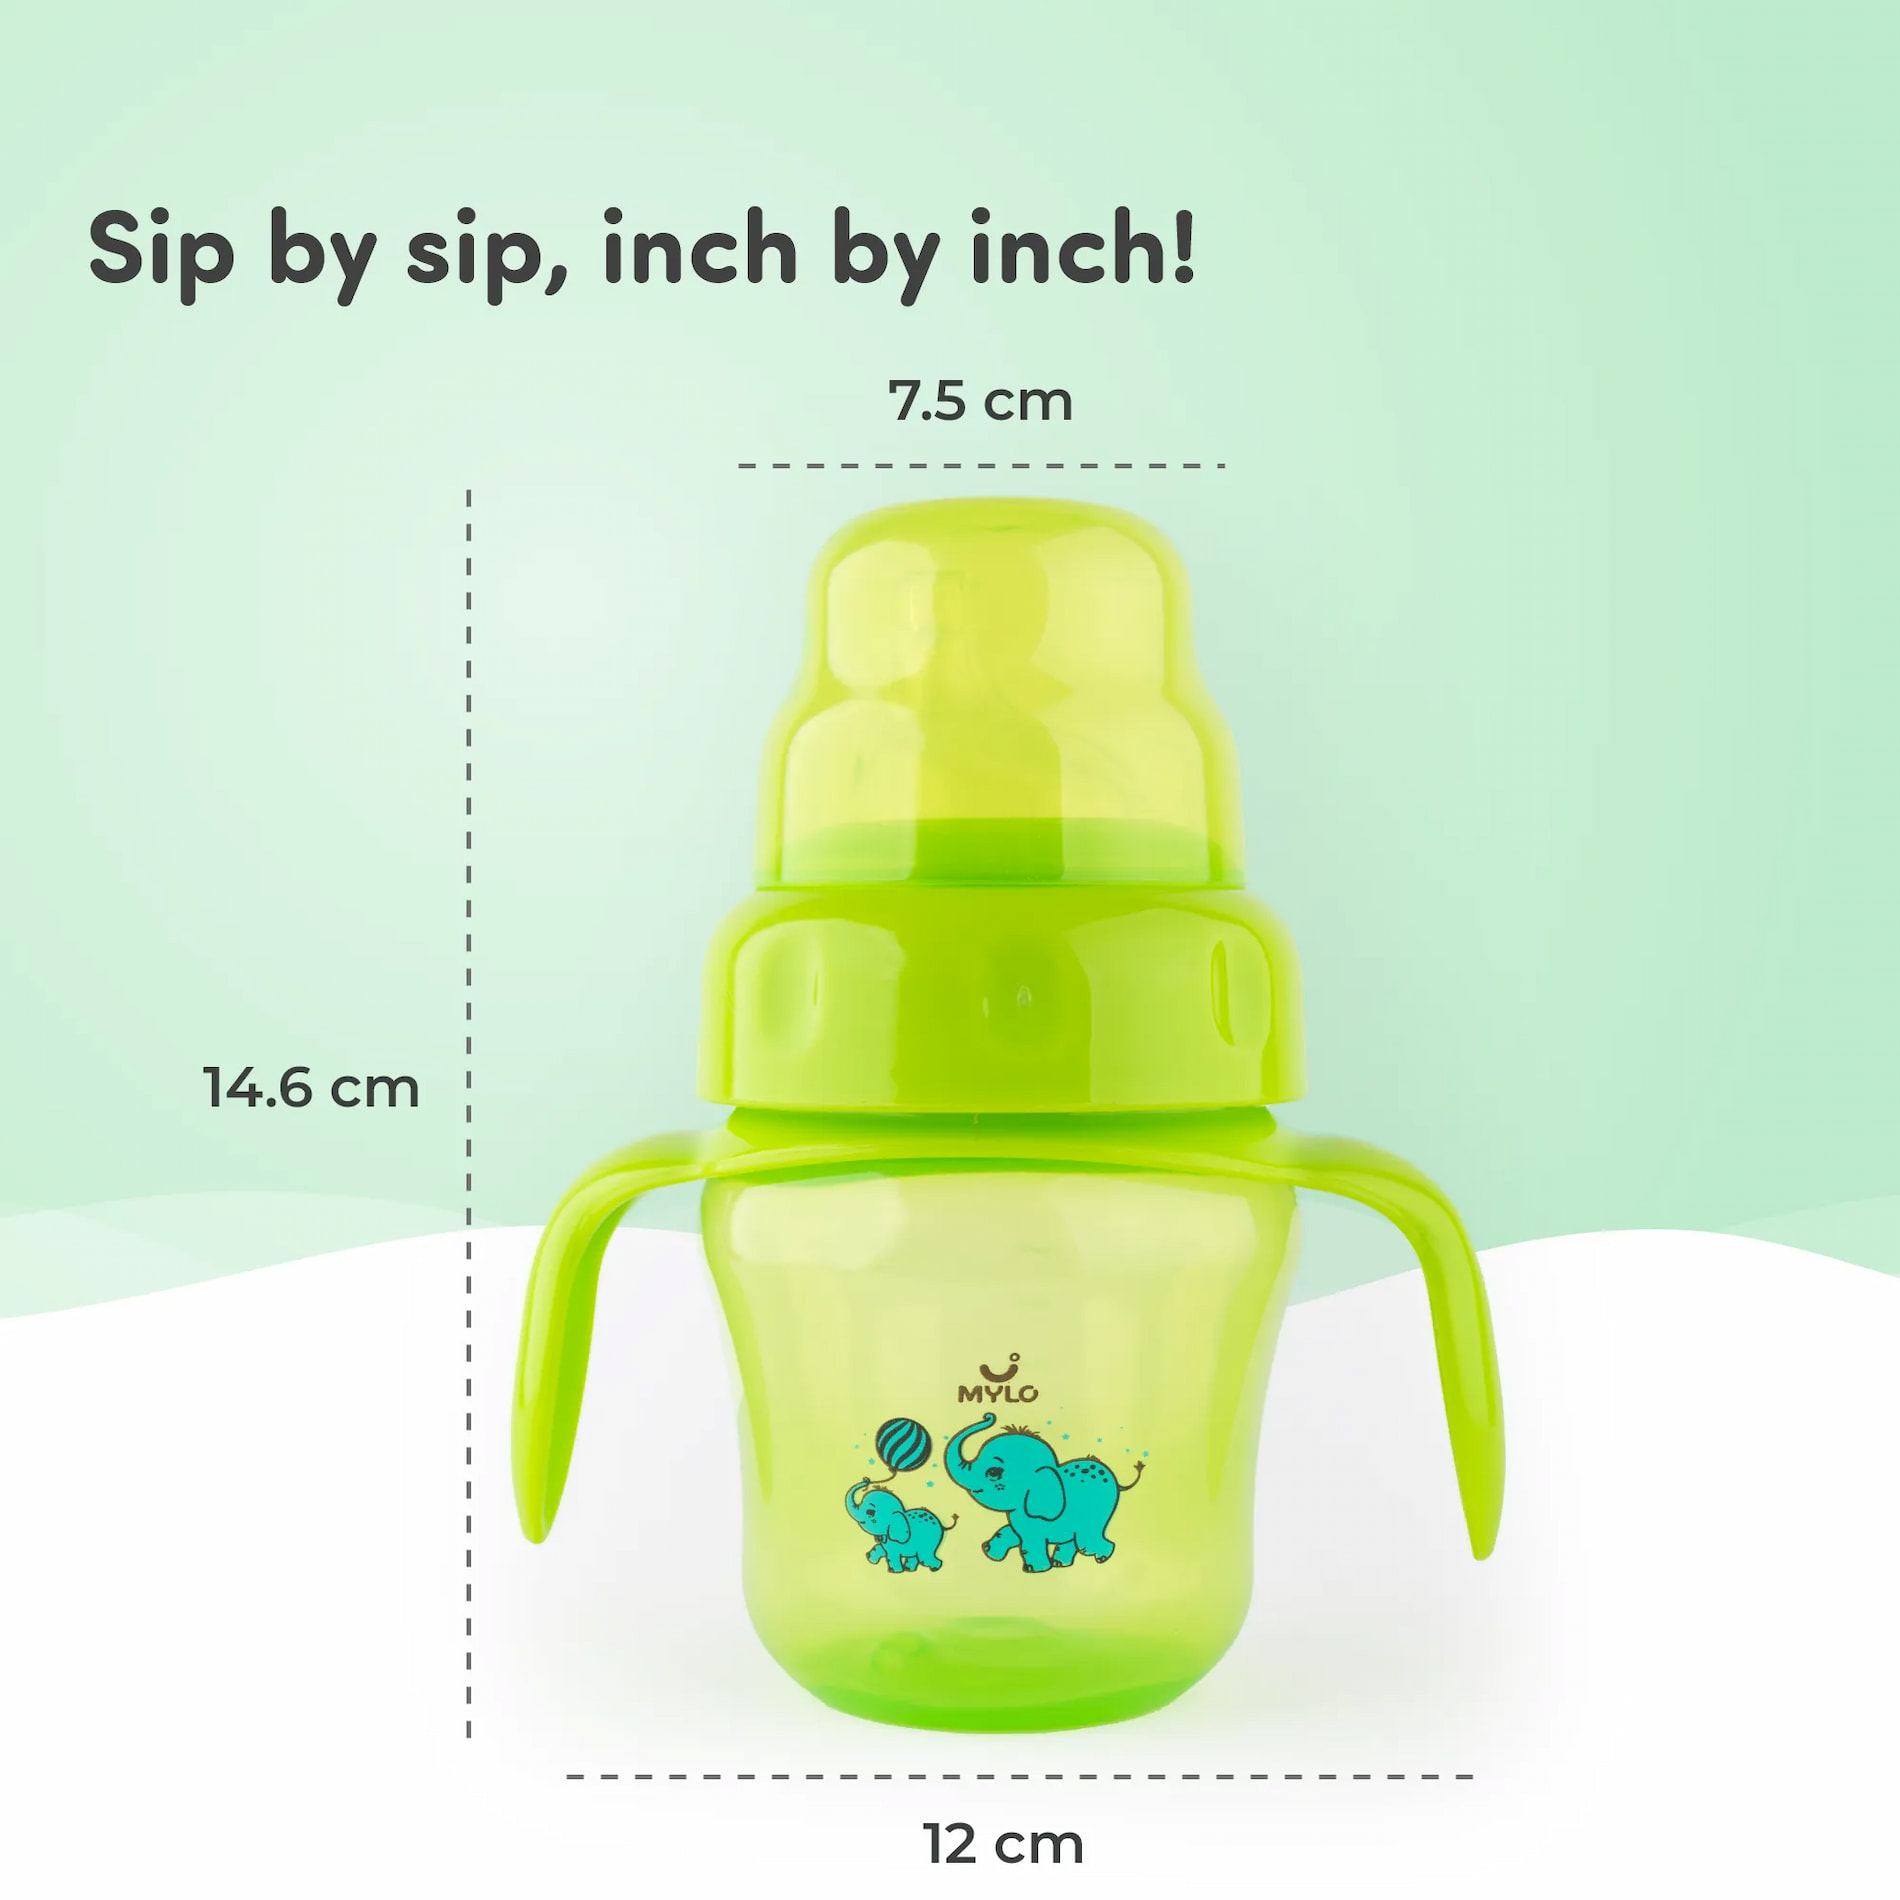 Baby Sipper | 2-in-1 Convertible Sipper with Spout & Straw | Sipper Bottle for Kids - 150ml - BPA-Free (Green)